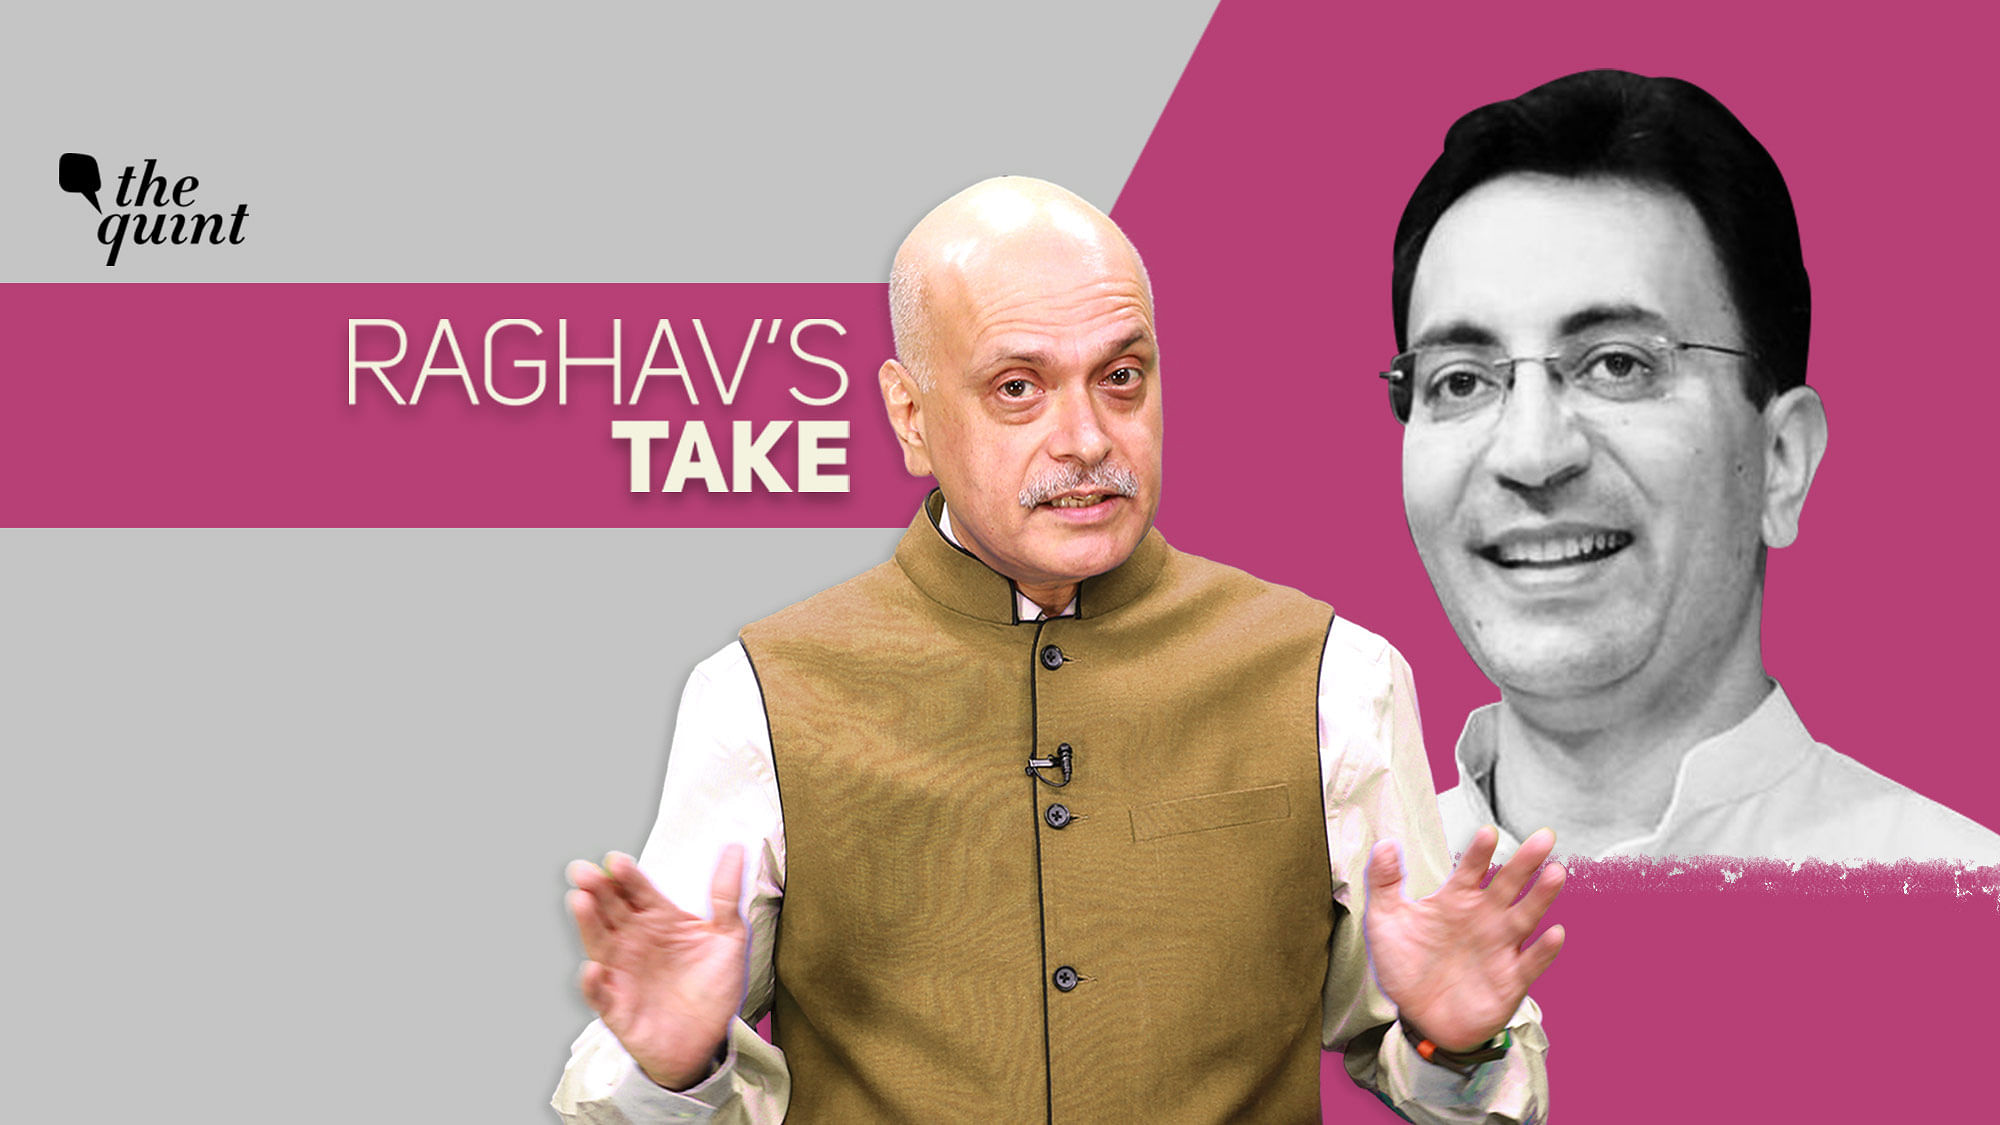 Jitin Prasada to COVID policies, The Quint’s Editor-in-Chief Raghav Bahl shares his views on recent developments.